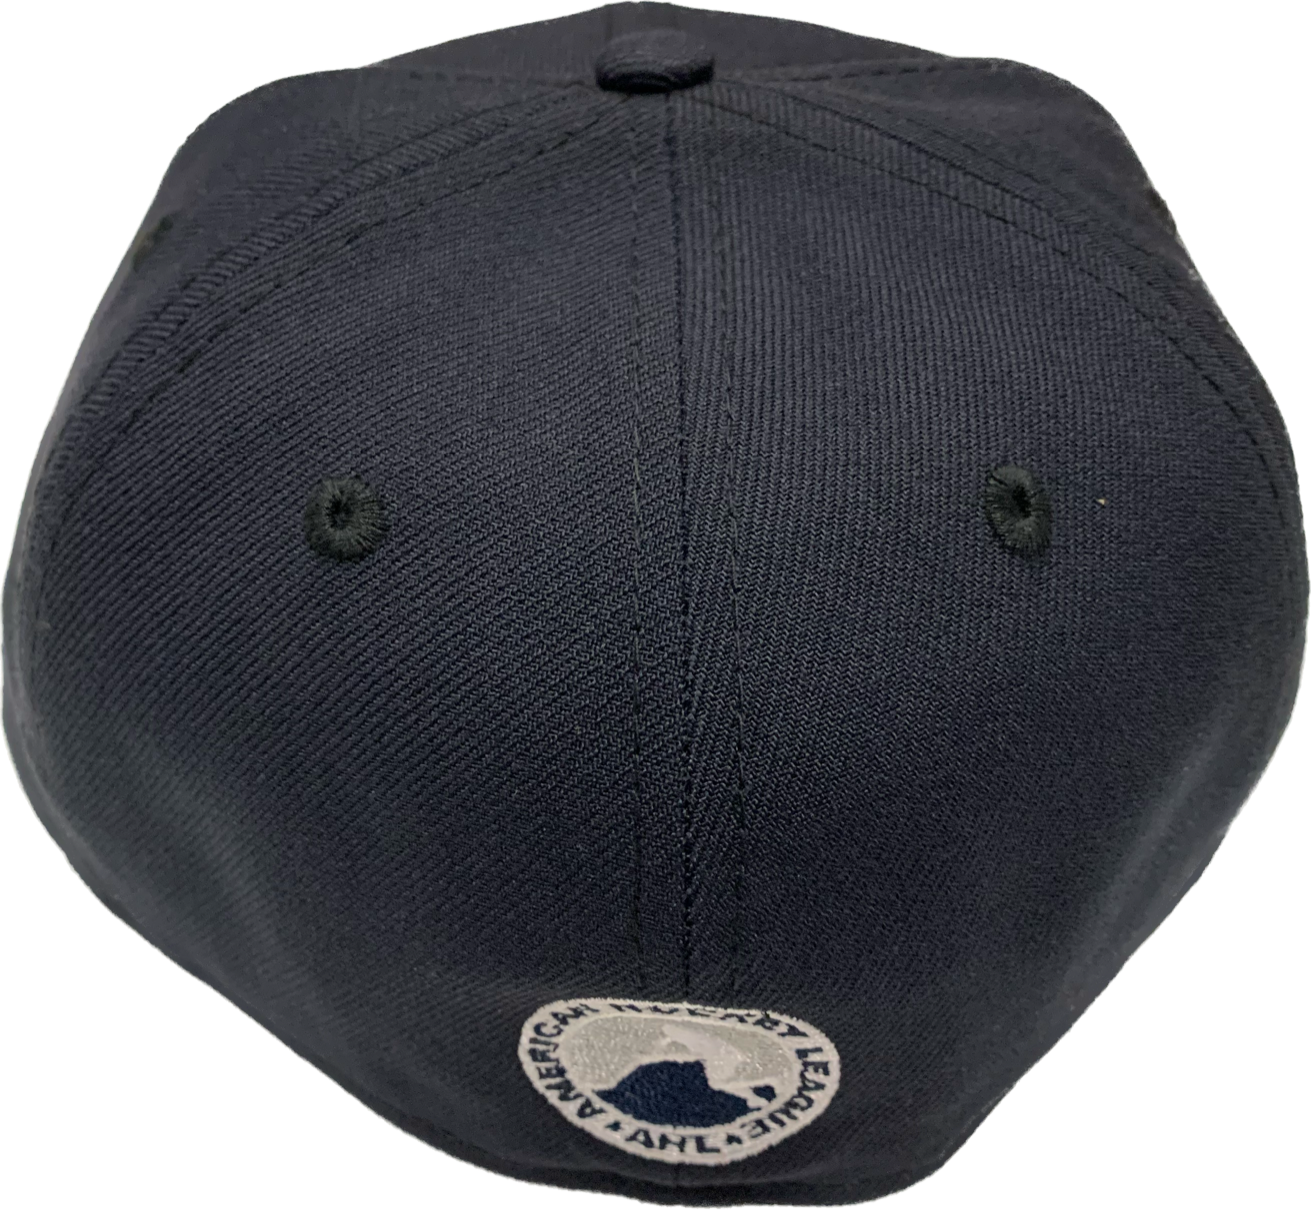 TORONTO MARLIES 'WHITE & BLUE' 59FIFTY FITTED HAT – Anthem Shop